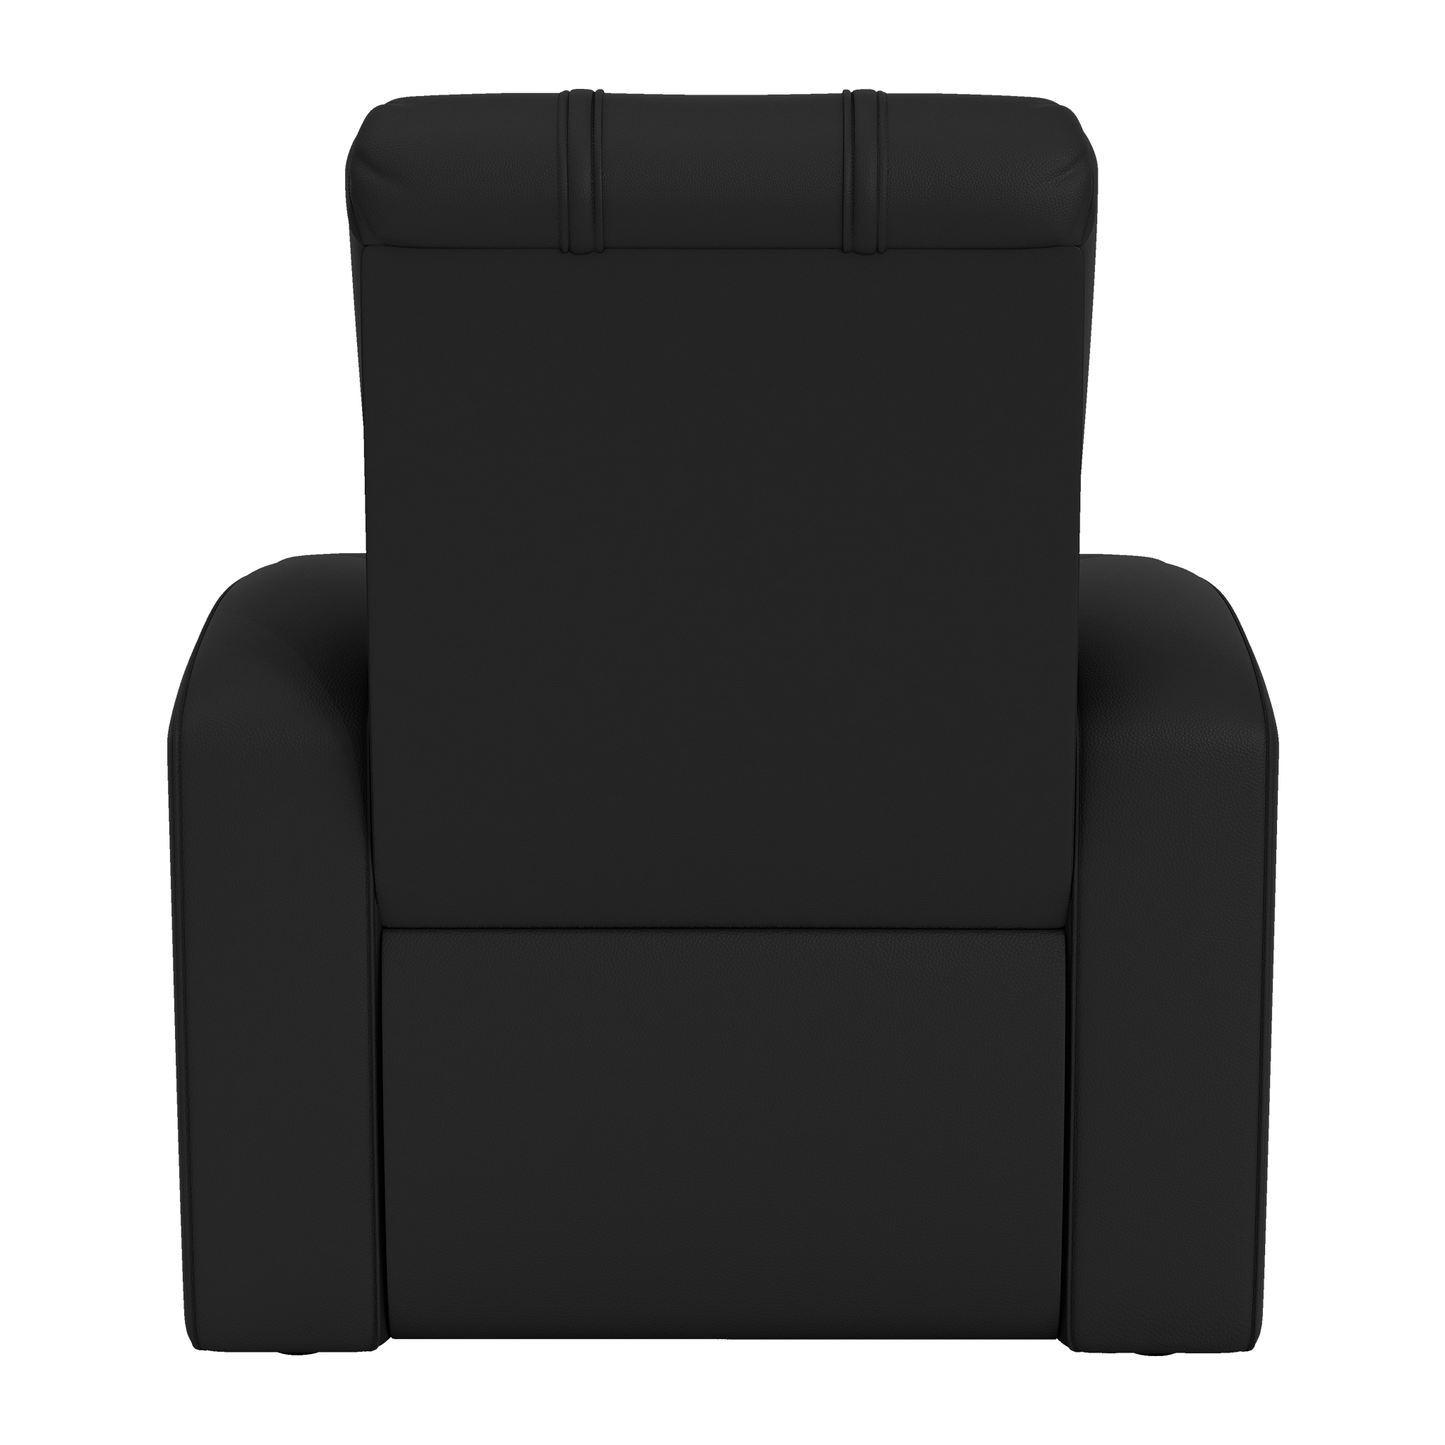 Relax Home Theater Recliner with Eastern Kentucky Colonels Logo